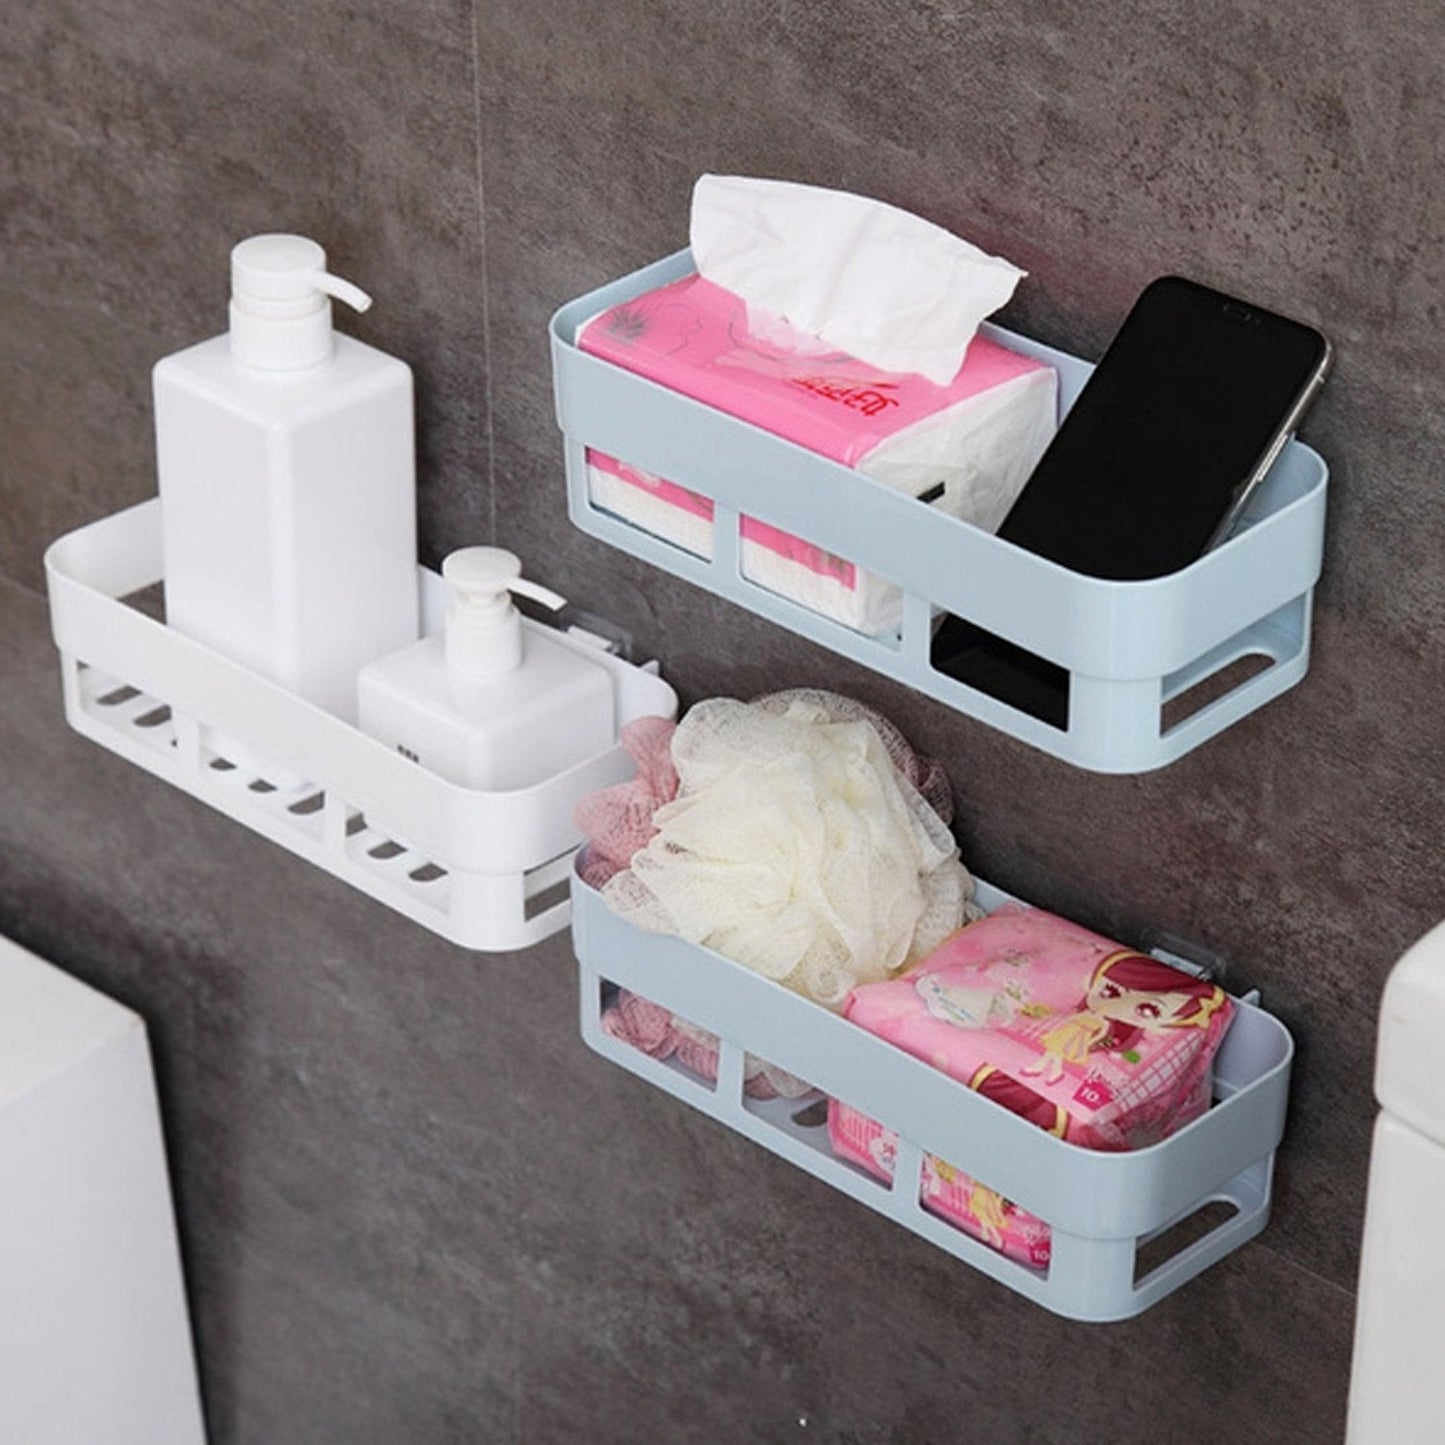 4029 ABS Plastic Shower Corner Caddy Basket Shelf Rack with Wall Mounted Suction Cup for Bathroom Kitchen DeoDap